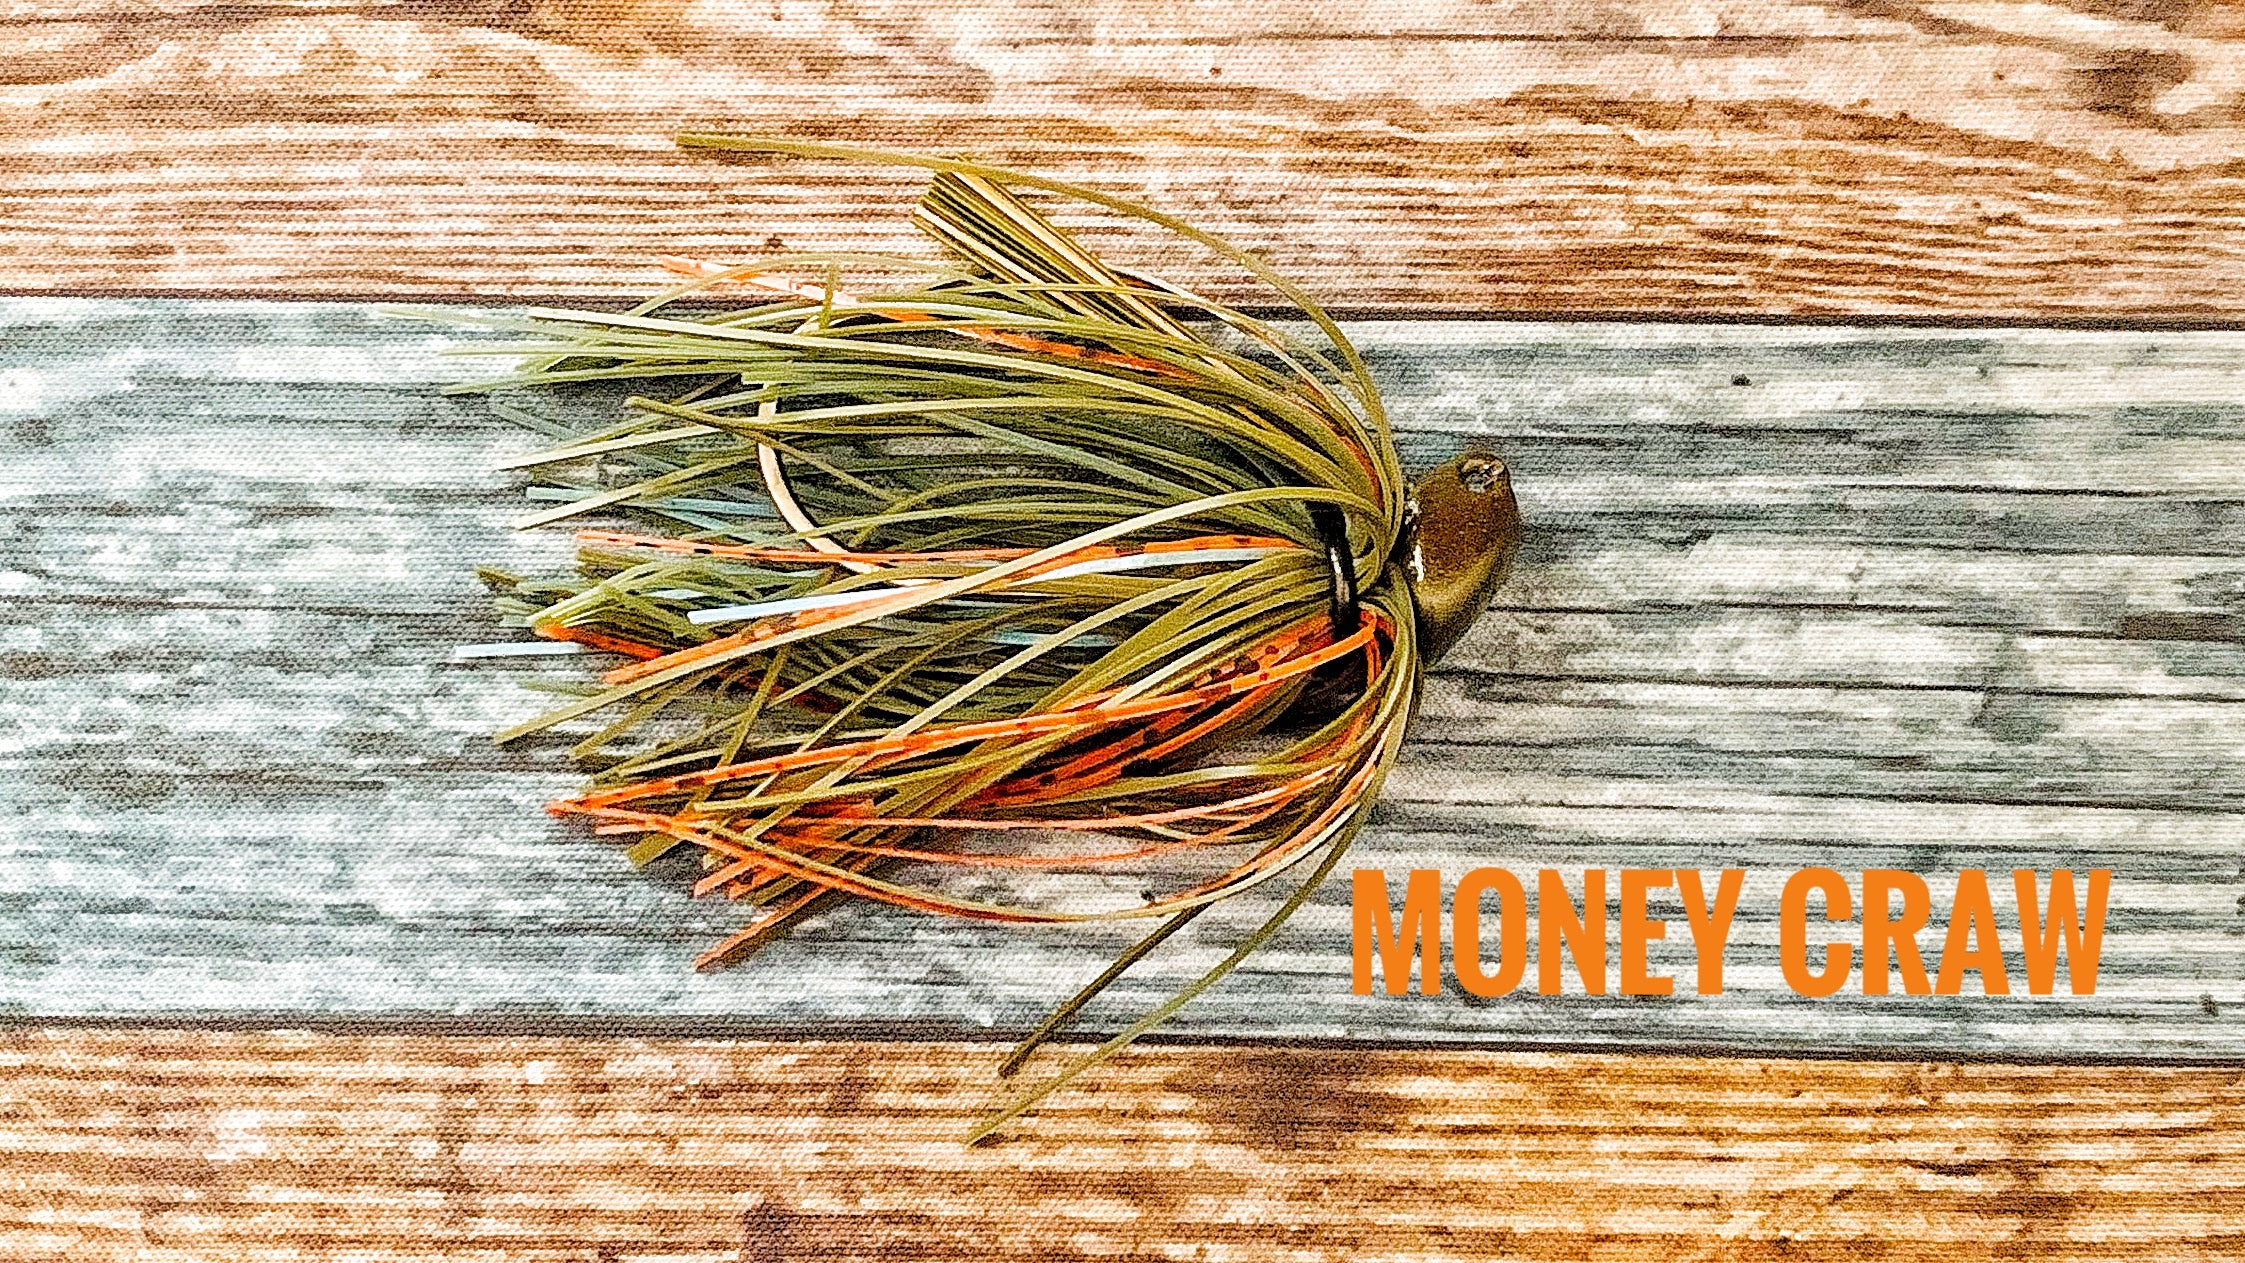 FT Flipping Jig with Rattles, Weed Guard, and Bait Keeper | 3/4 oz.,  Midnight (PN: 73306)